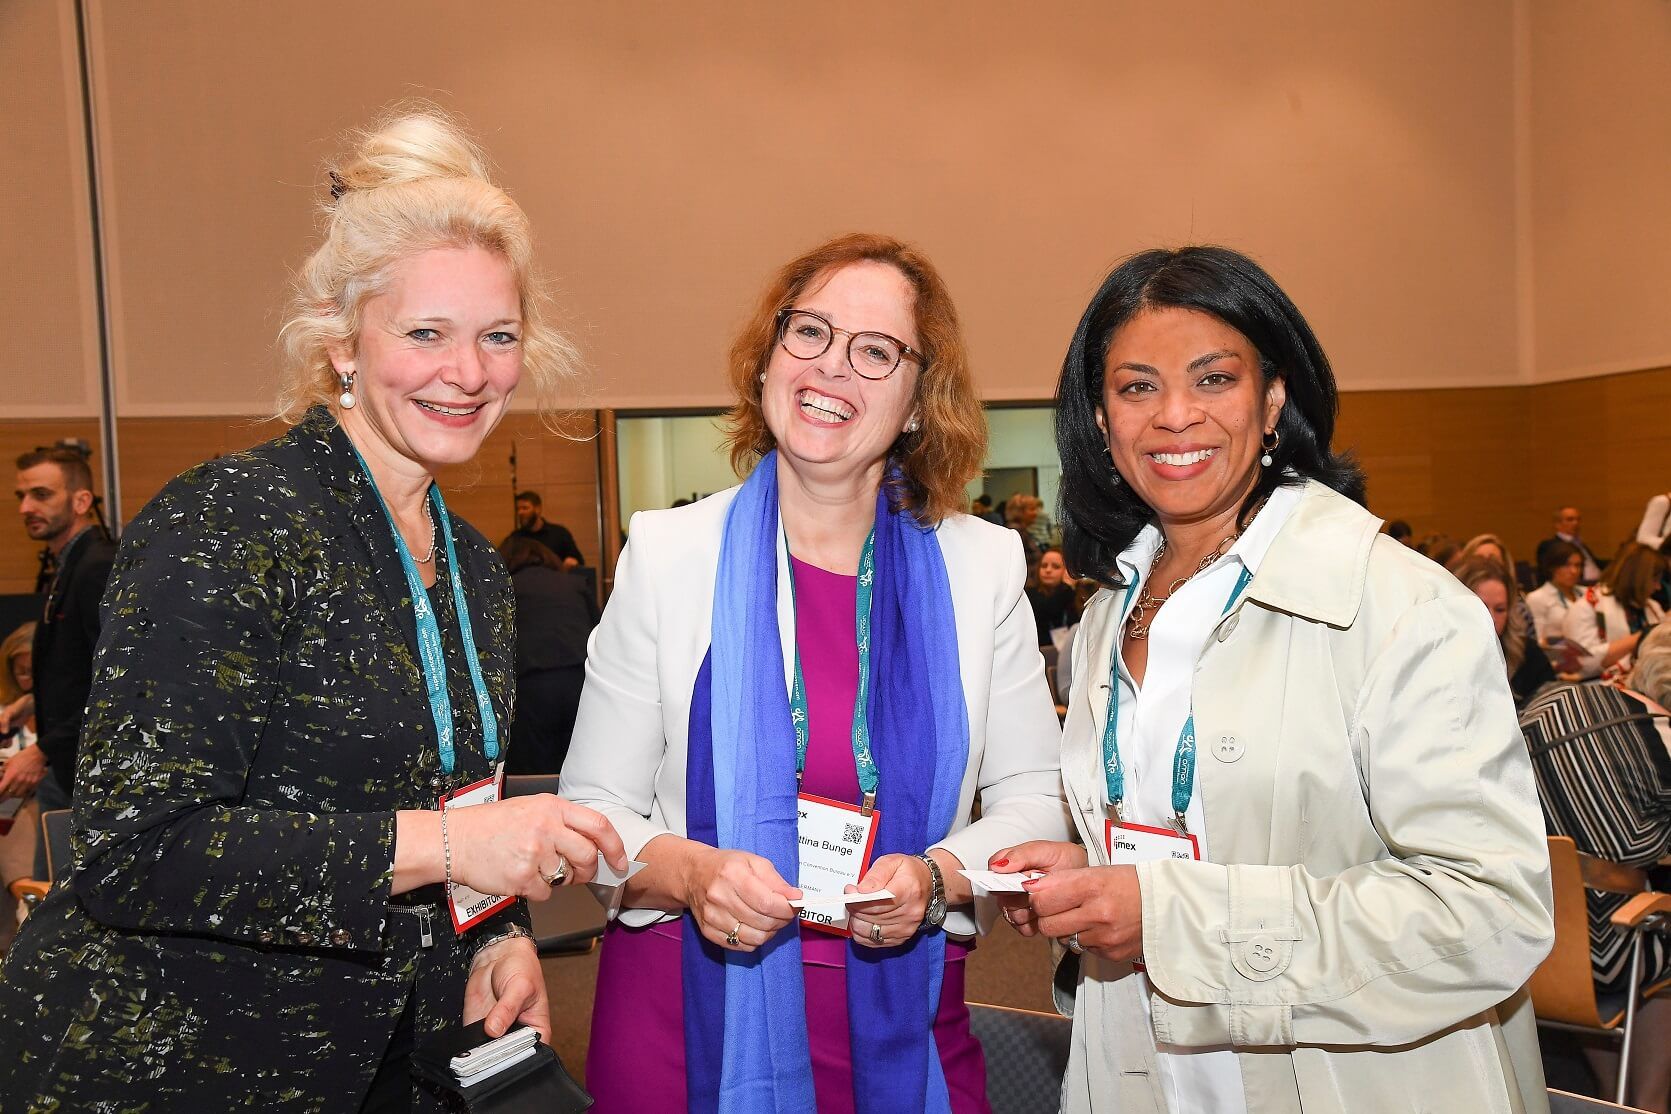 Gender equality tops agenda at She Means Business as IMEX America 2019 set to drive diversity debate